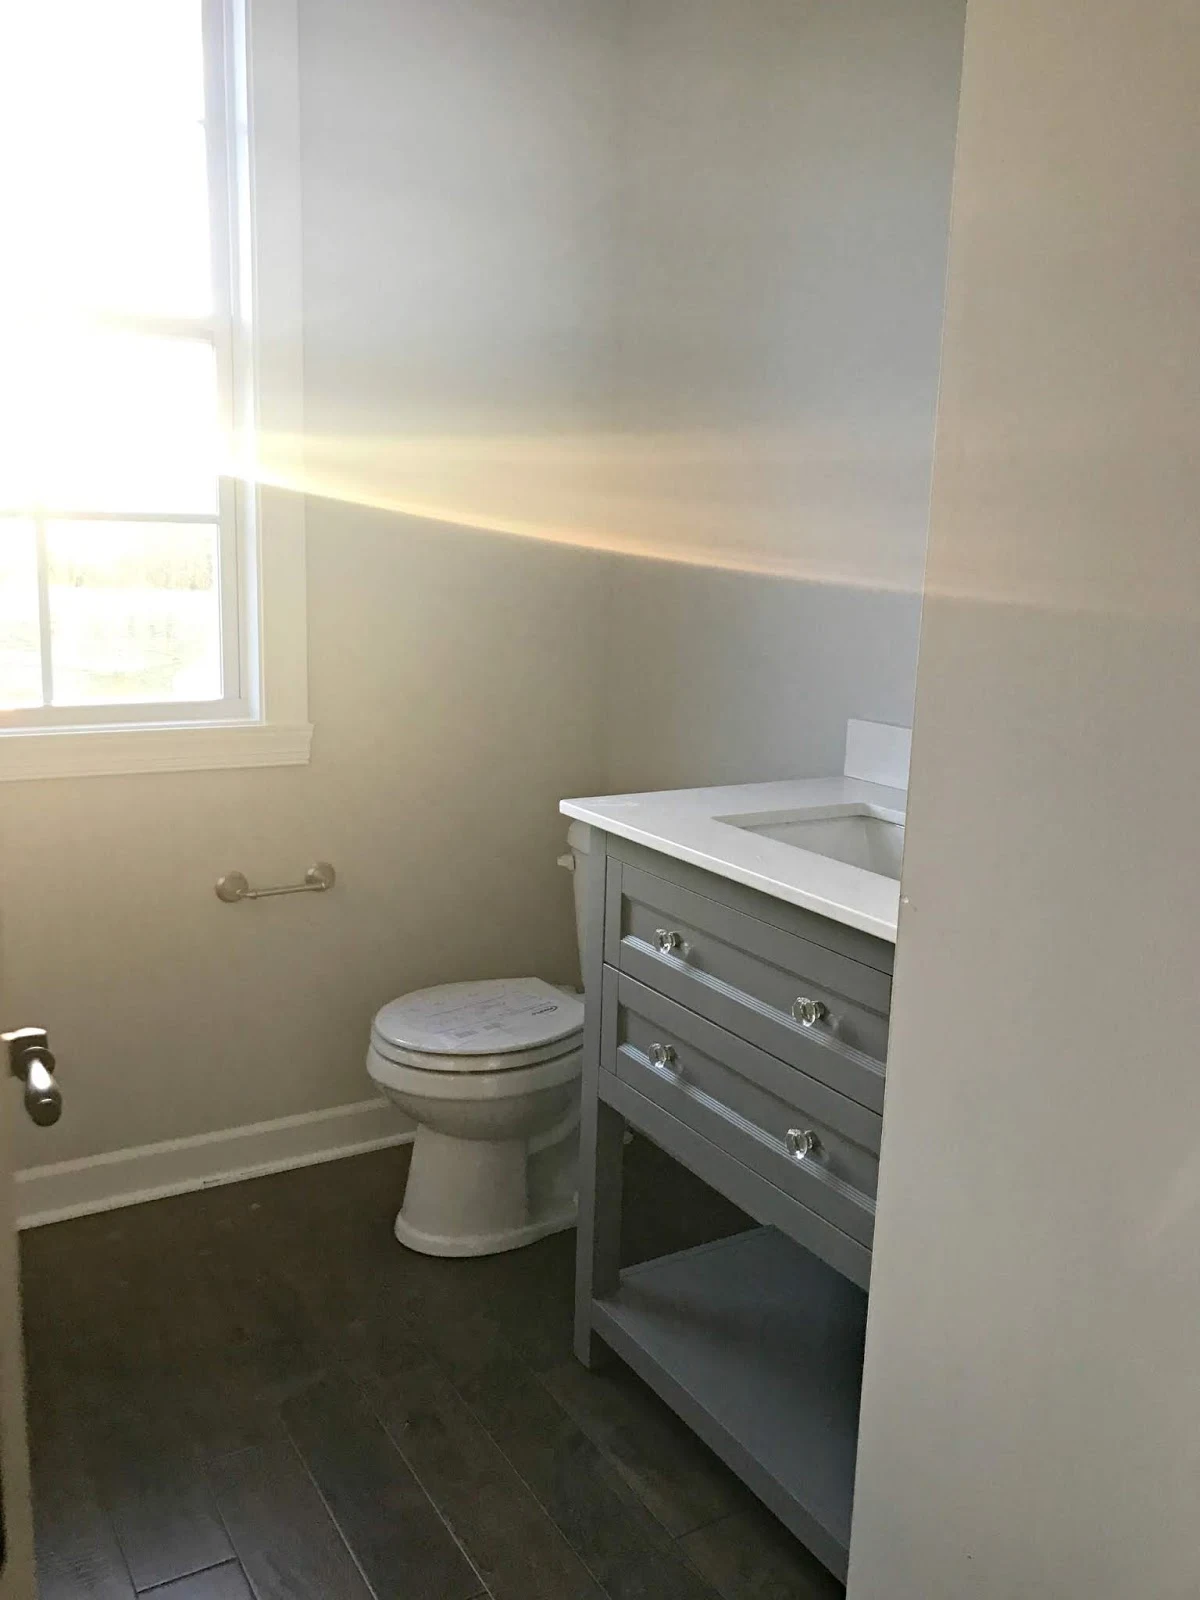 Powder room vanity with shelf and drawers